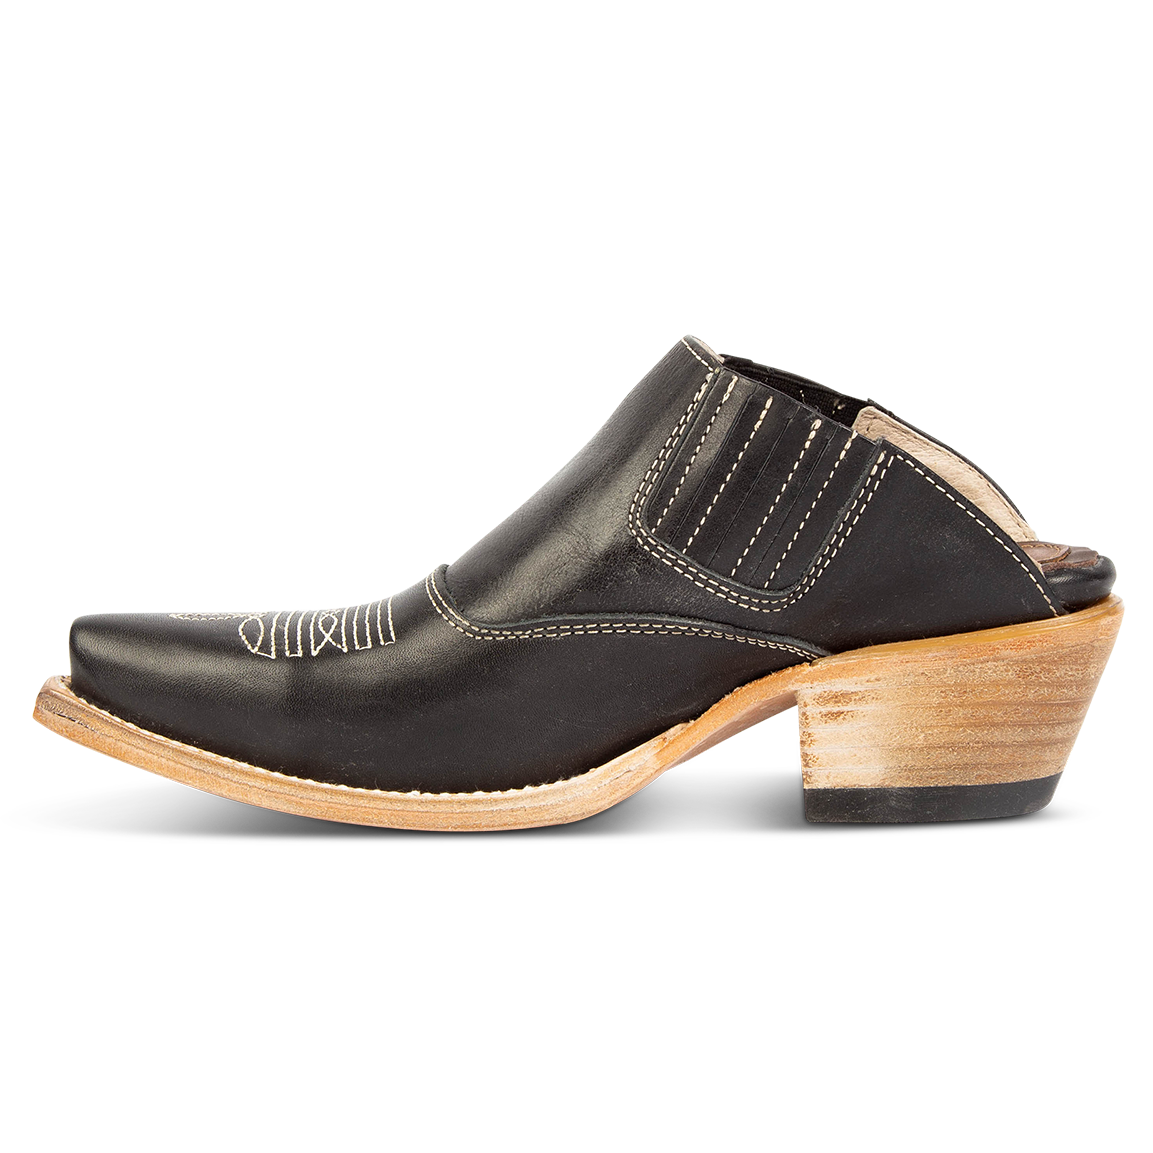 Inside view showing elastic gore and stitching on FREEBIRD women's Wentworth black western mule